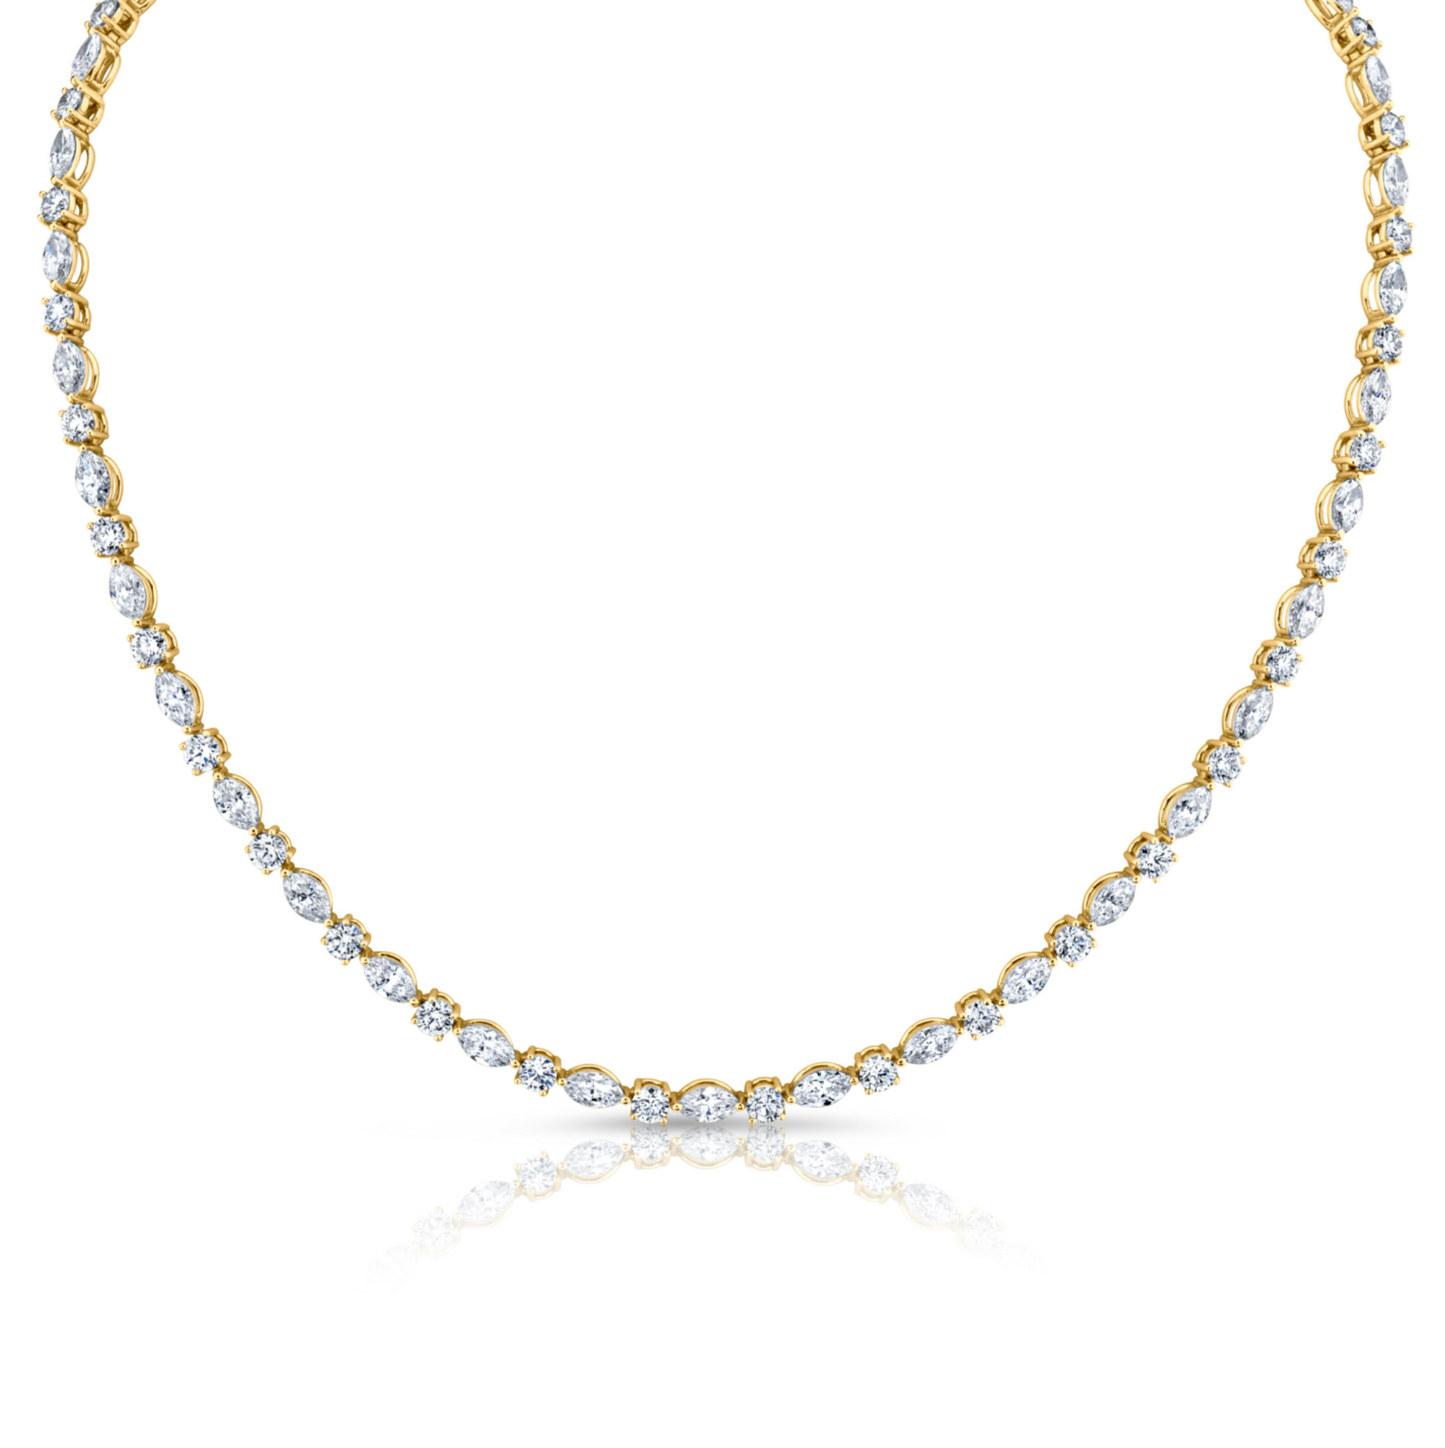 14.96 Carat Round and Marquise-Cut Diamond Necklace